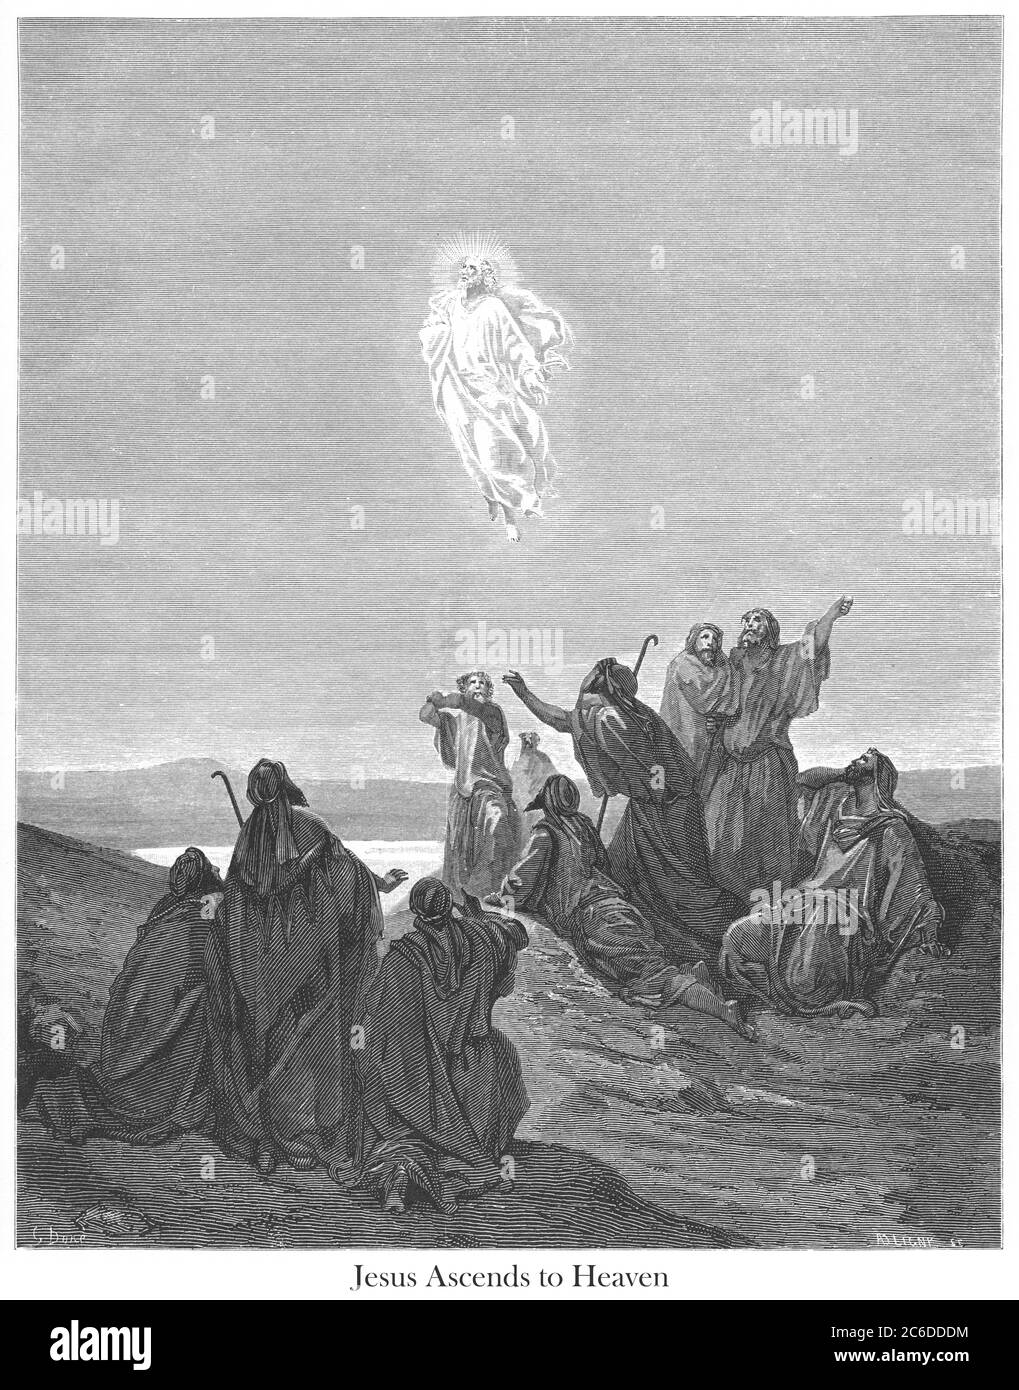 The Ascension (or Jesus ascends to Heaven) [Mark 16:19] From the book 'Bible Gallery' Illustrated by Gustave Dore with Memoir of Dore and Descriptive Letter-press by Talbot W. Chambers D.D. Published by Cassell & Company Limited in London and simultaneously by Mame in Tours, France in 1866 Stock Photo